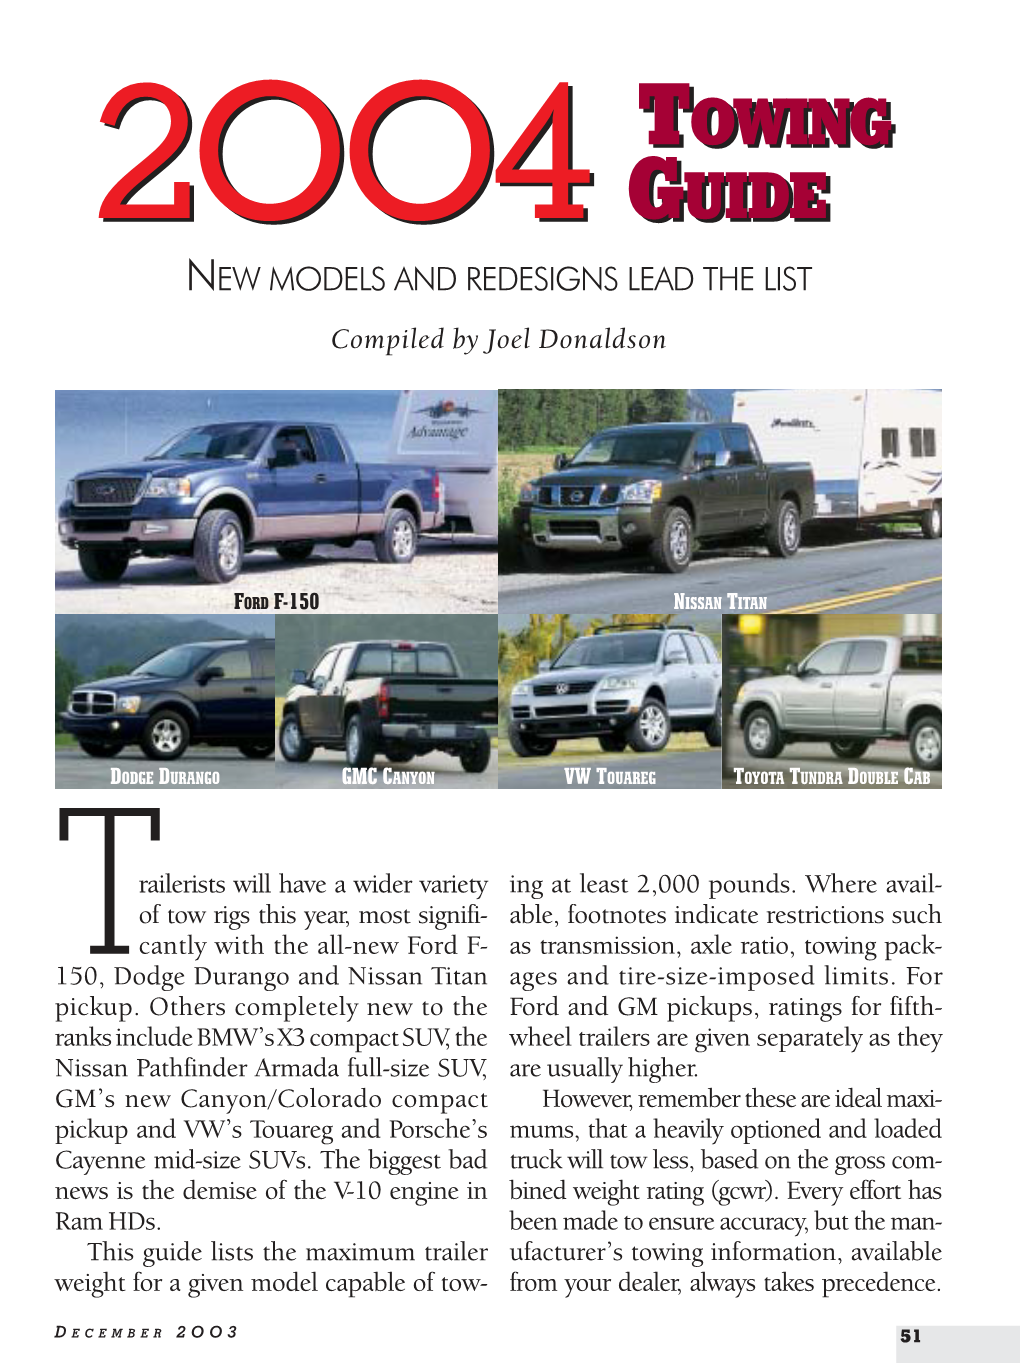 2004 Towing Guide